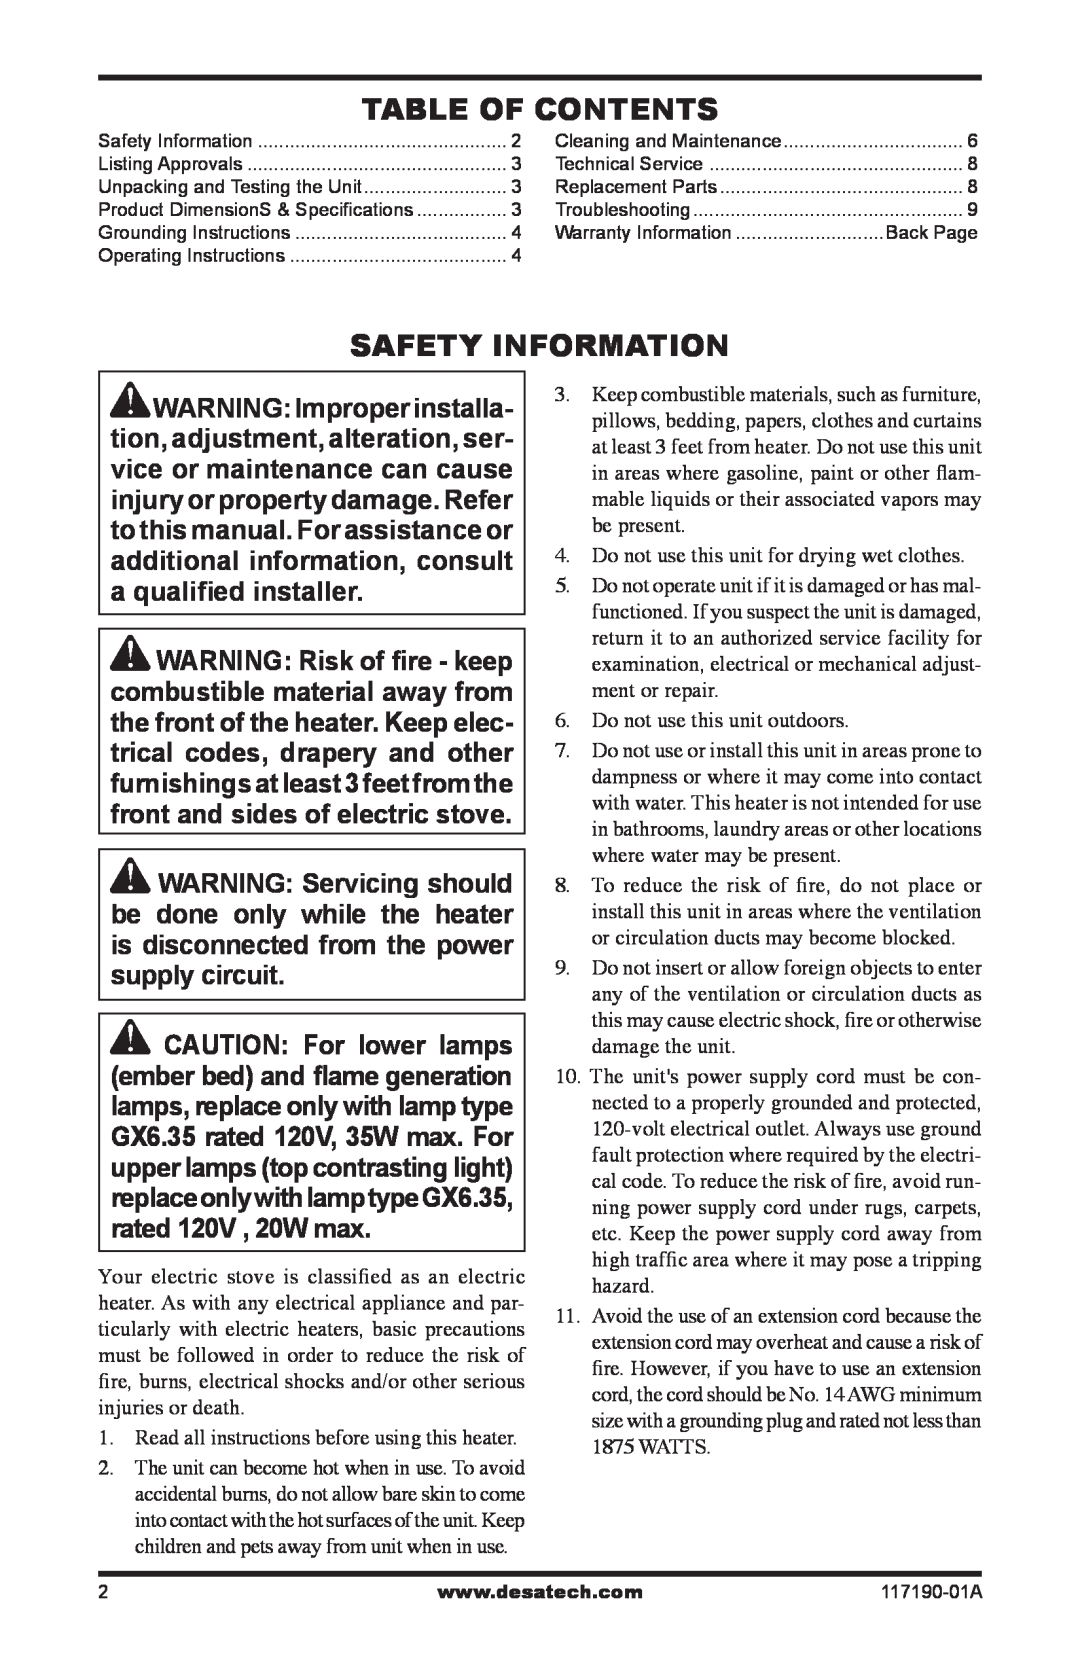 Desa CGESBL operation manual Table Of Contents, Safety Information 